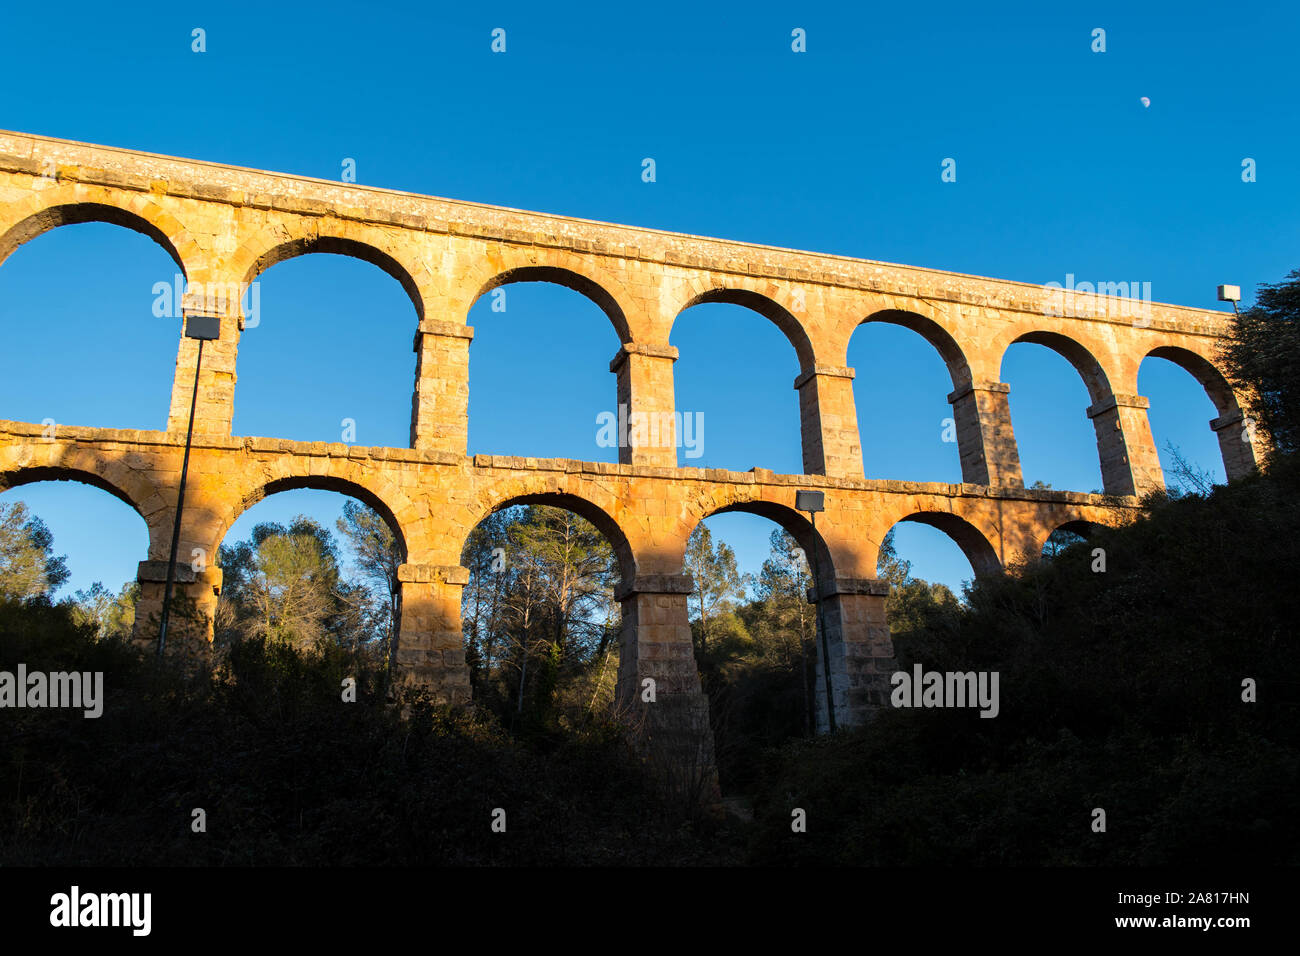 Tarragona Spain. Roman Ponte.Roman aqueduct with arches. Blue sky with sunset. Stock Photo